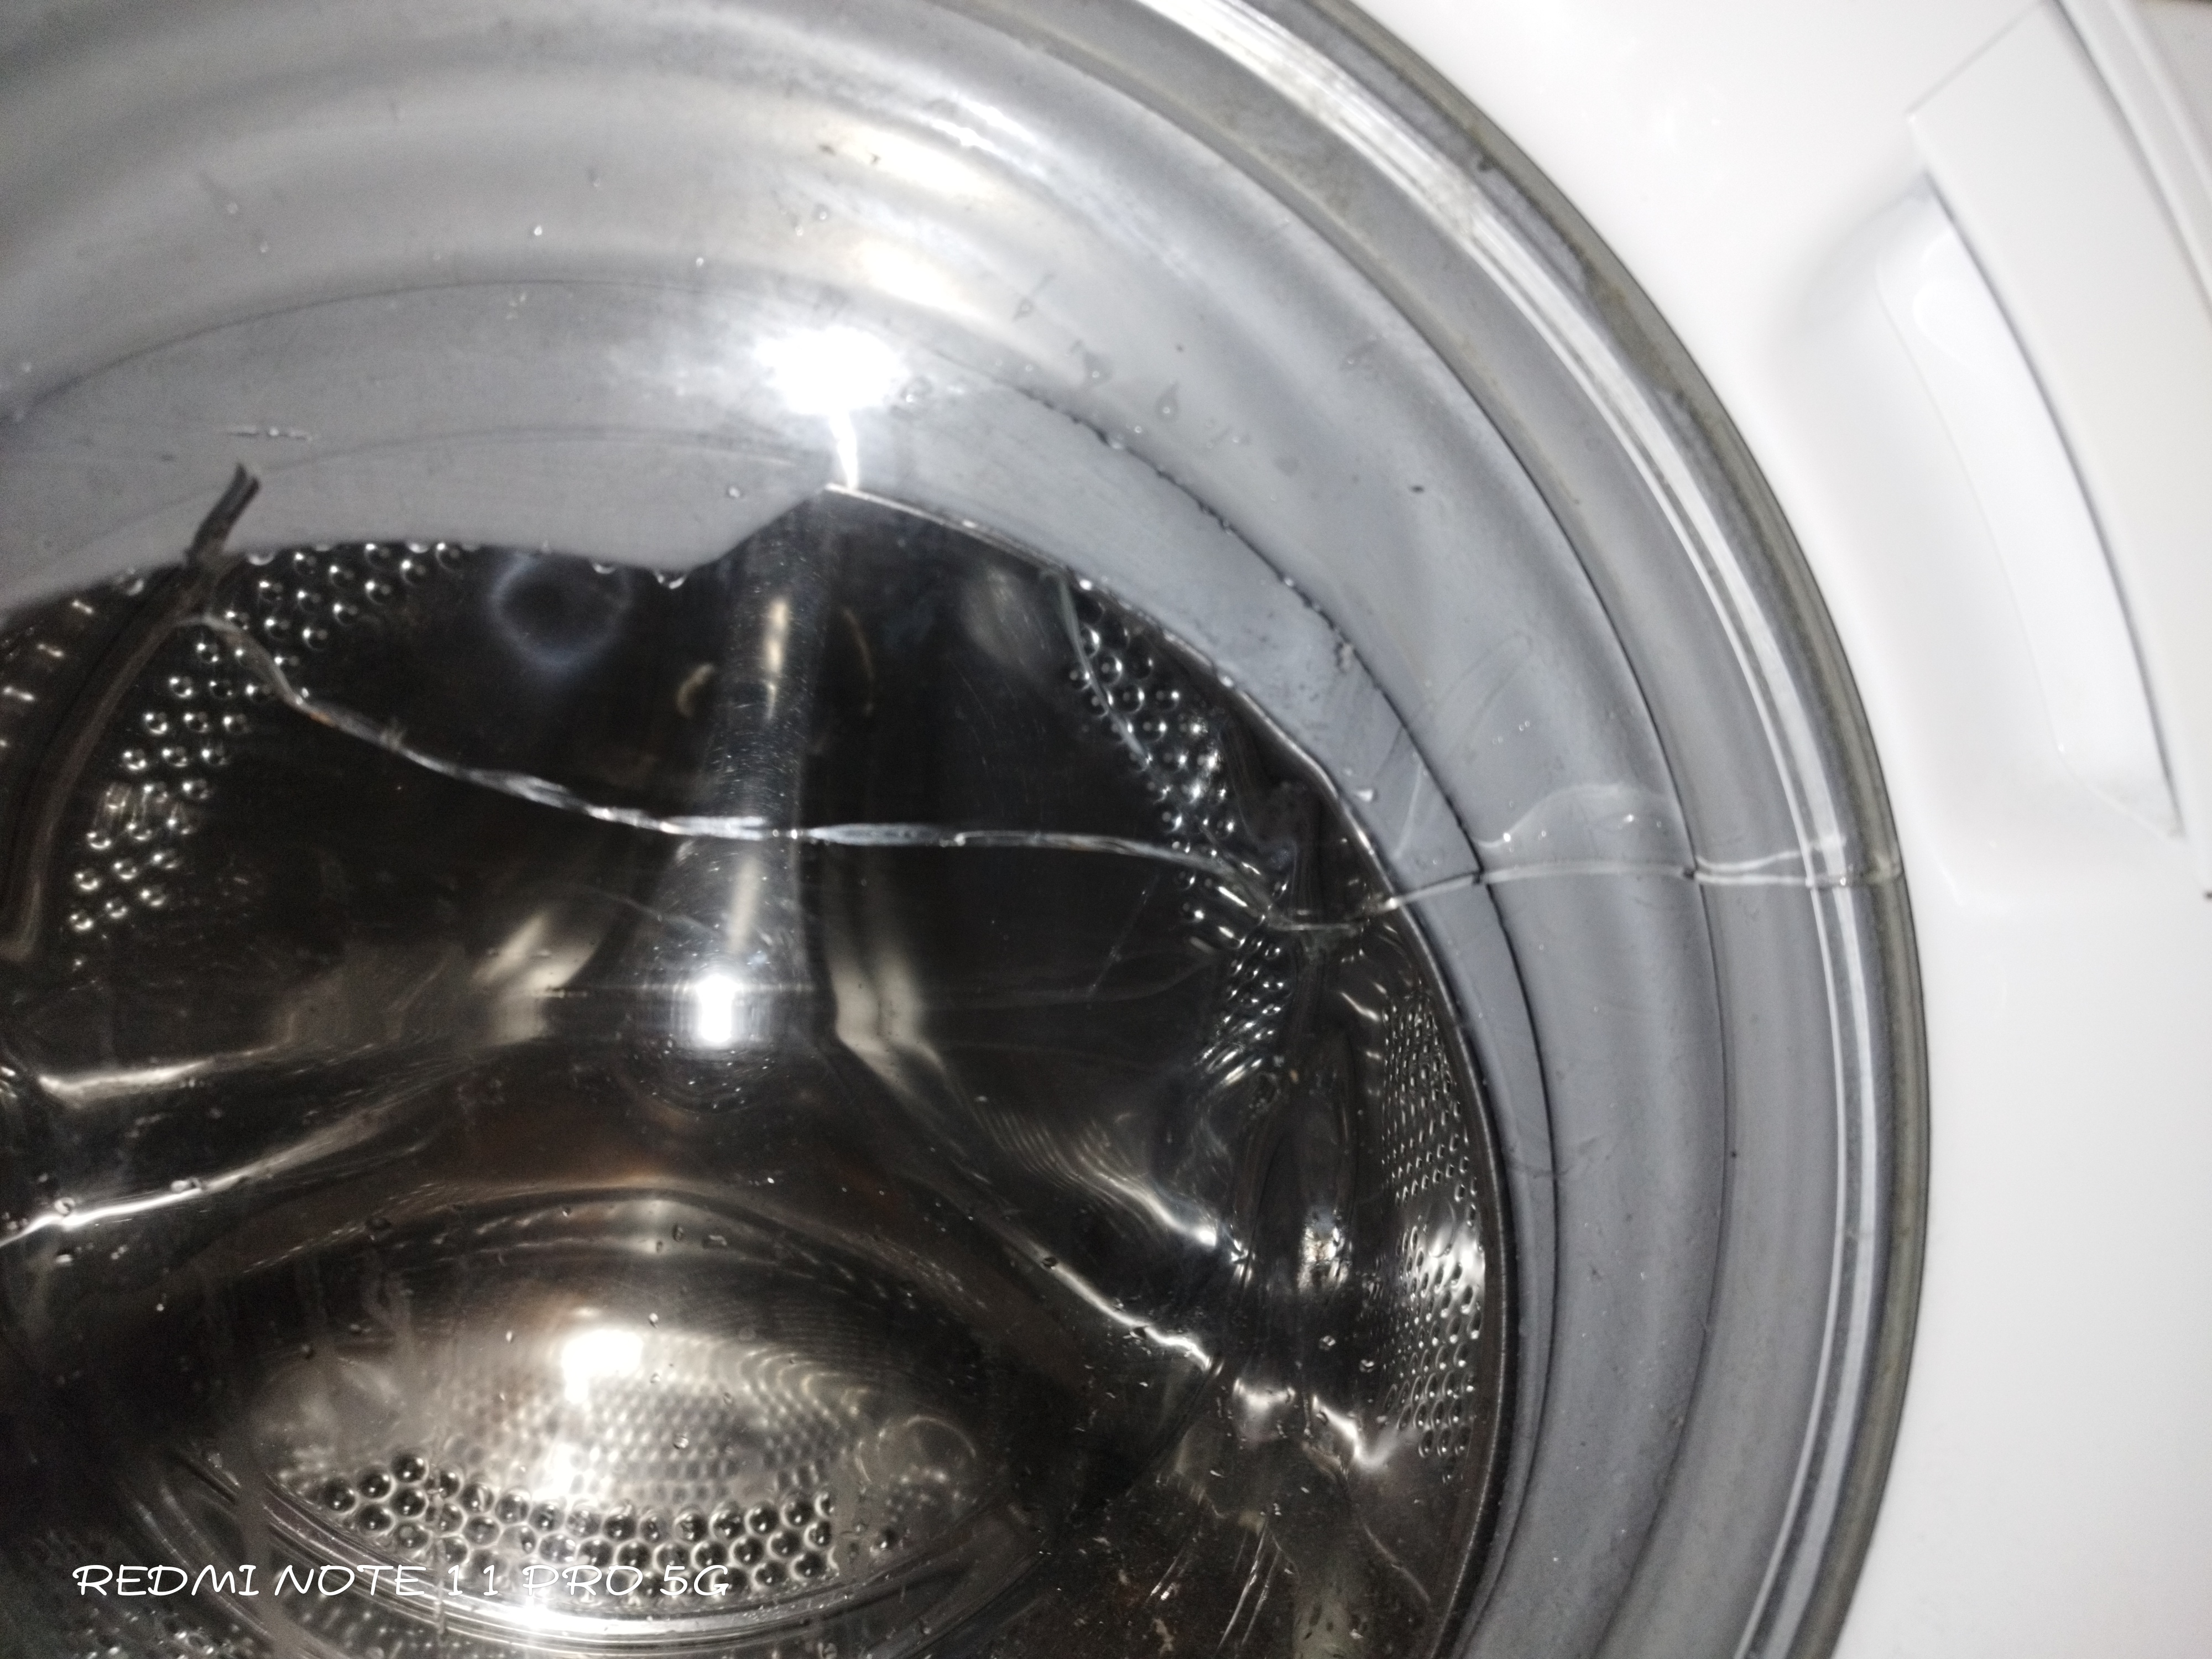 Hello, we are very satisfied with this washing machine, but the glass on the door was cracked and ...